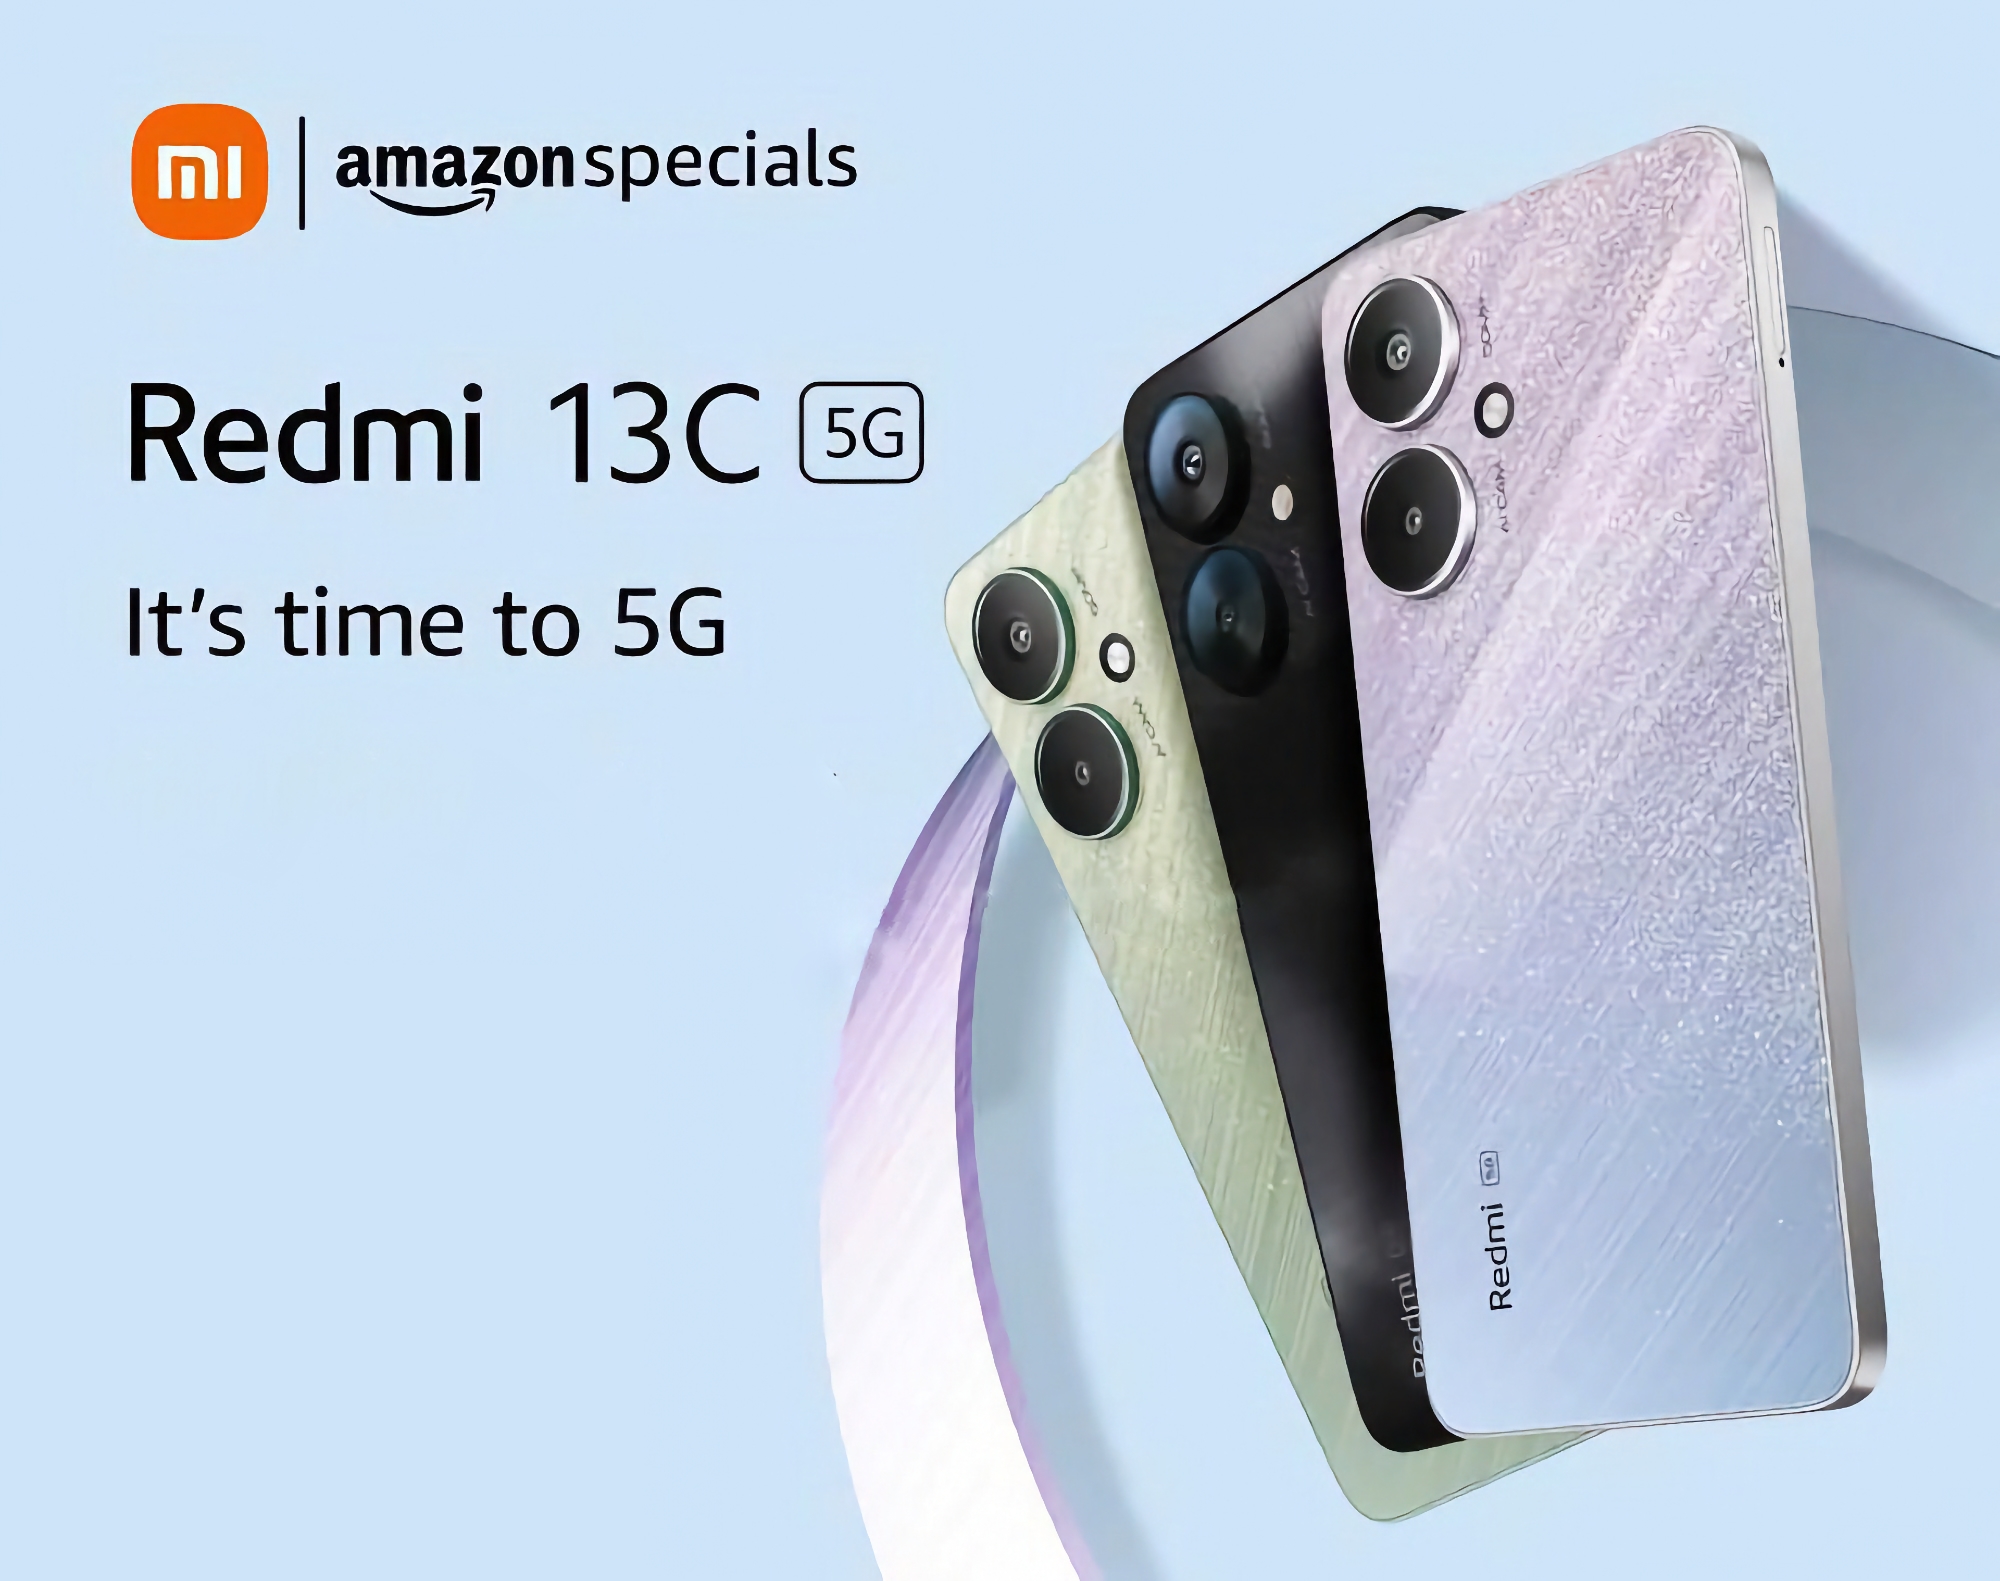 It's official: the Redmi 13C 5G will be powered by the MediaTek Dimensity 6100+ processor